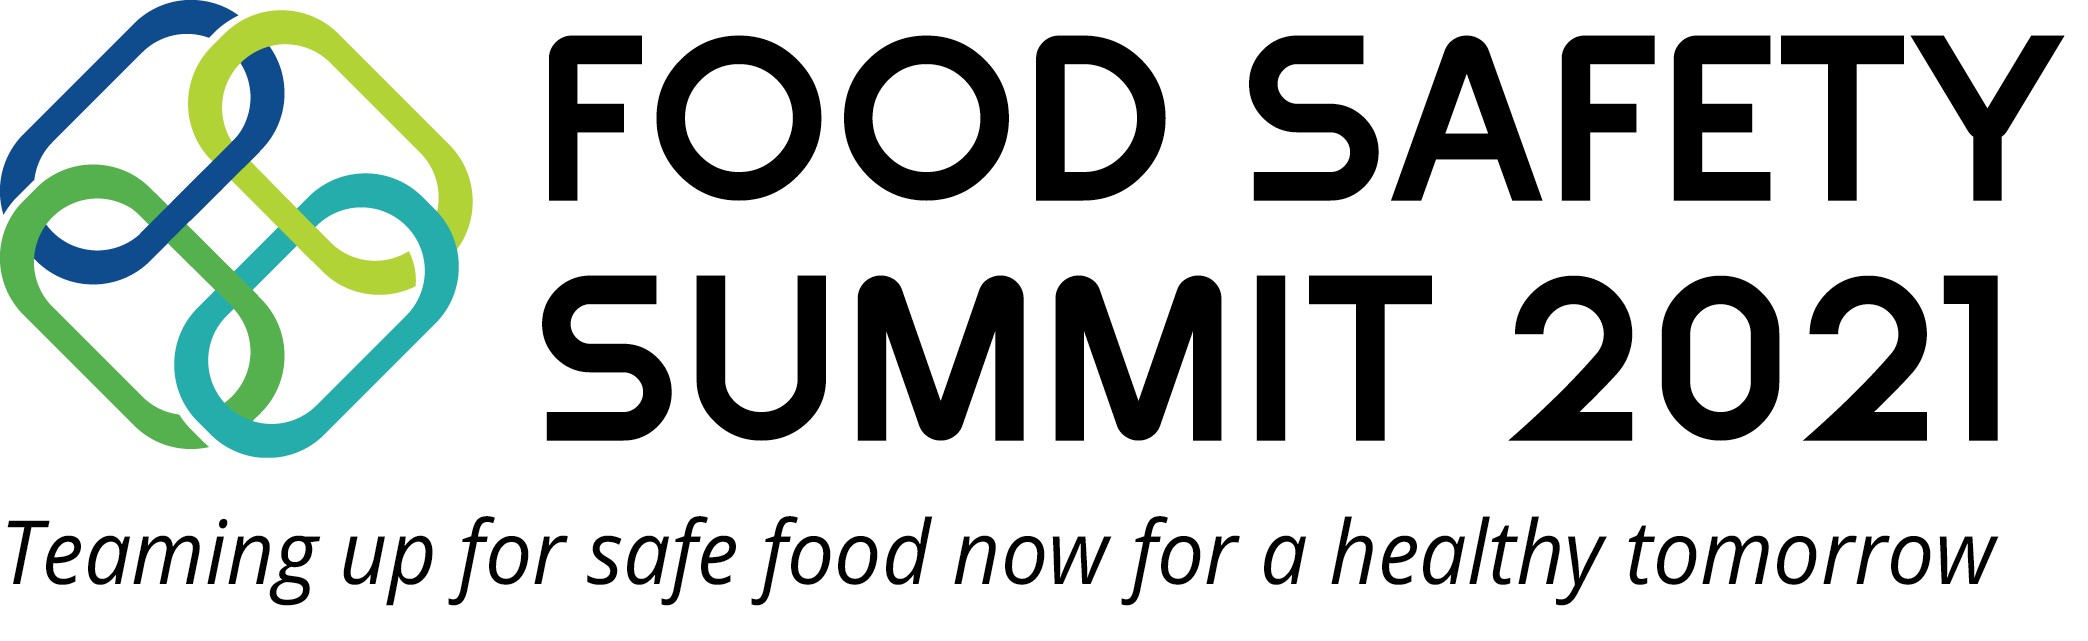 Food Safety Summit South Africa 2021 - Registration now open